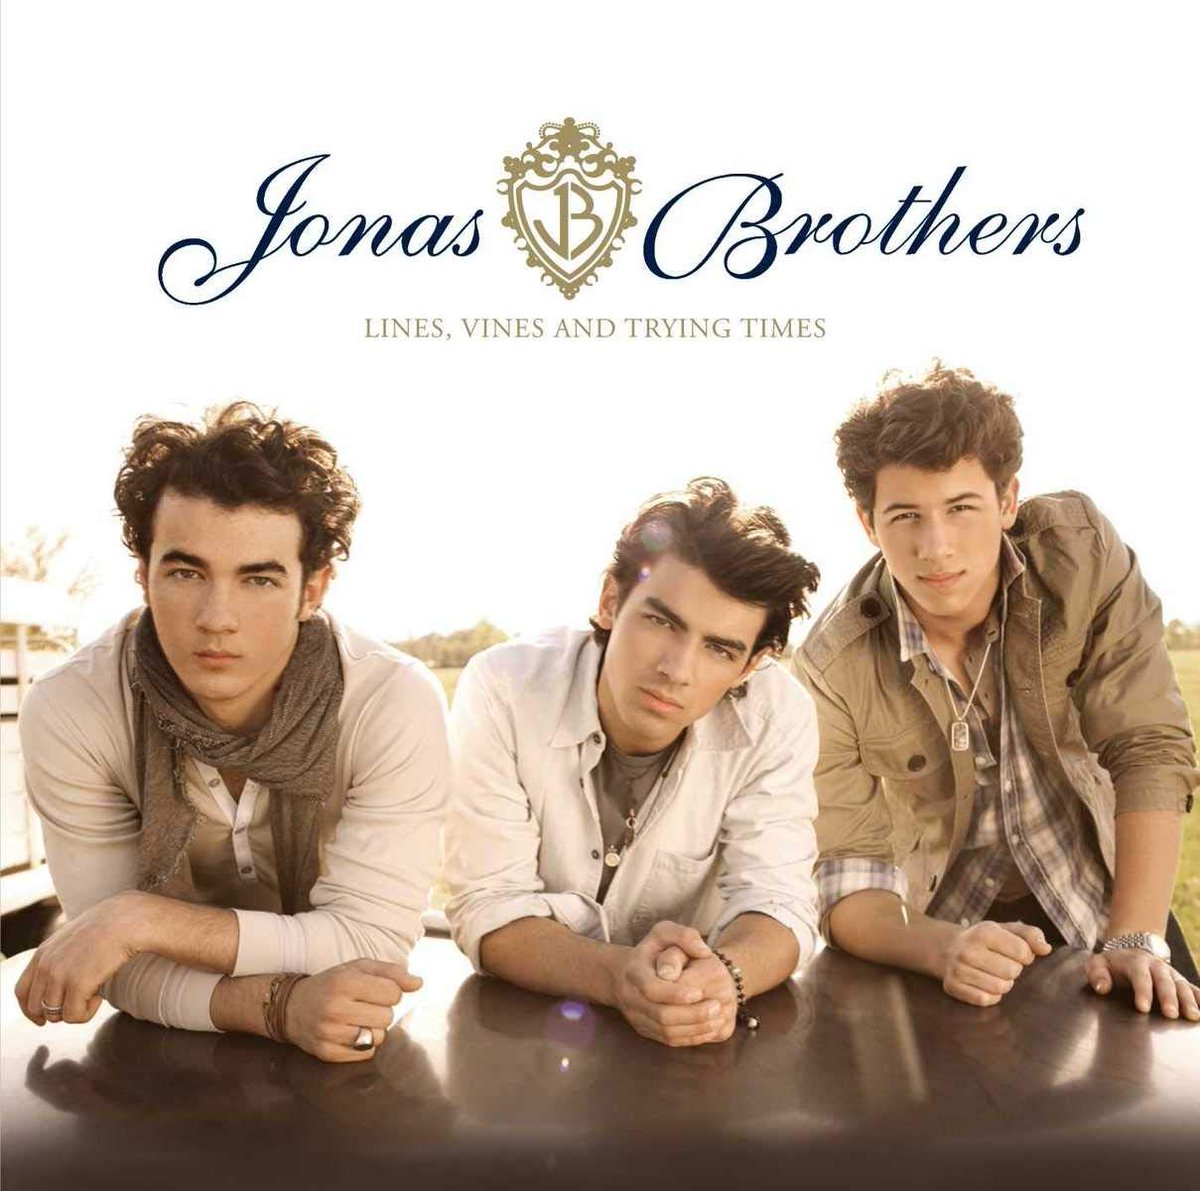 June 16, 2009: The Jonas Brothers’ album “Lines, Vines, and Trying Times” was released. Miley Cyrus was featured on the track “Before The Storm” and several other songs on the album were written about her.